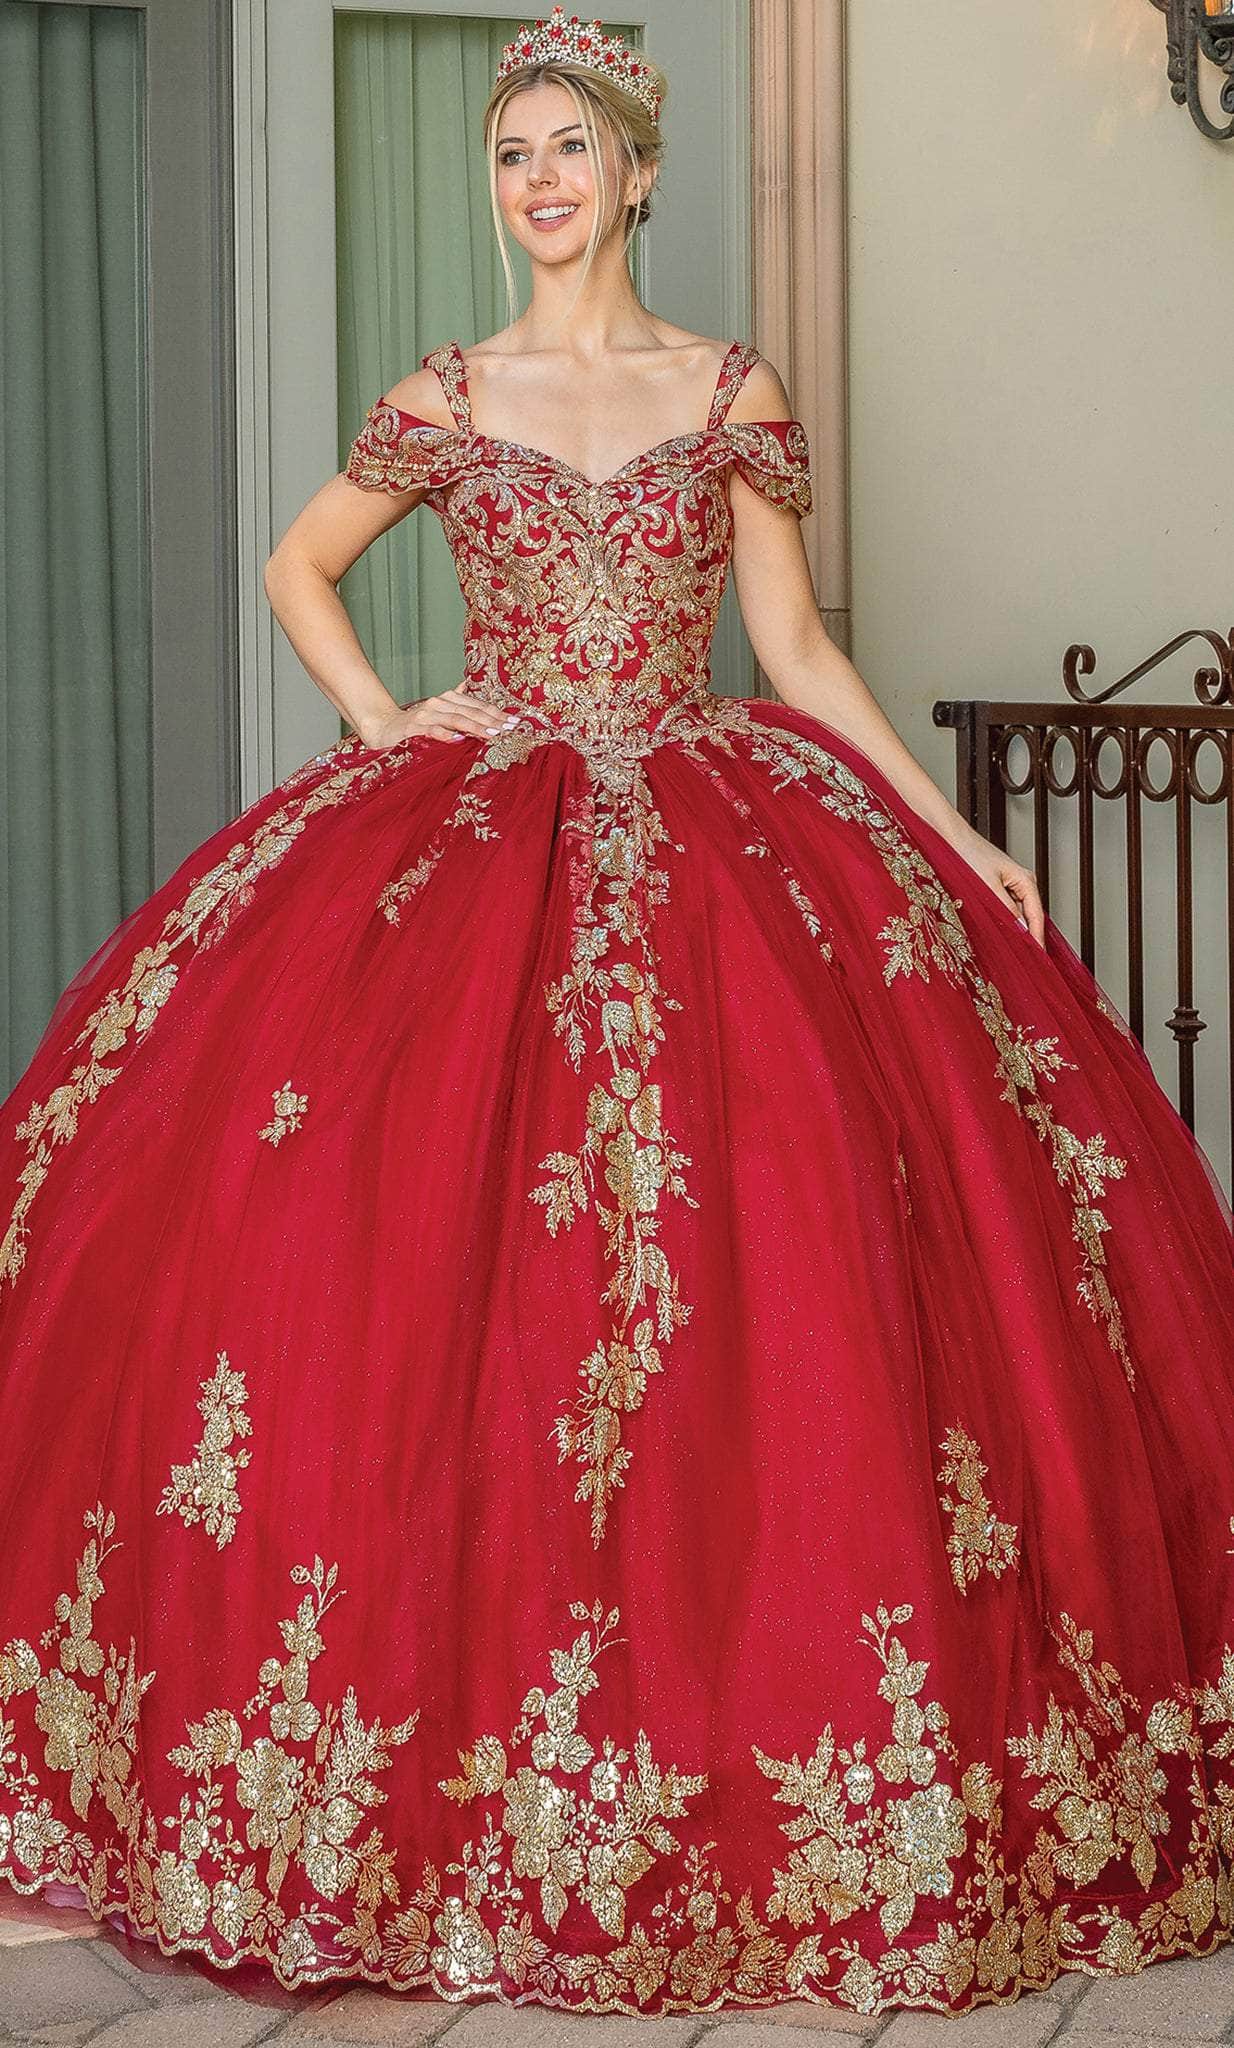 Image of Dancing Queen 1657 - Sequin Embroidered Sweetheart Ballgown